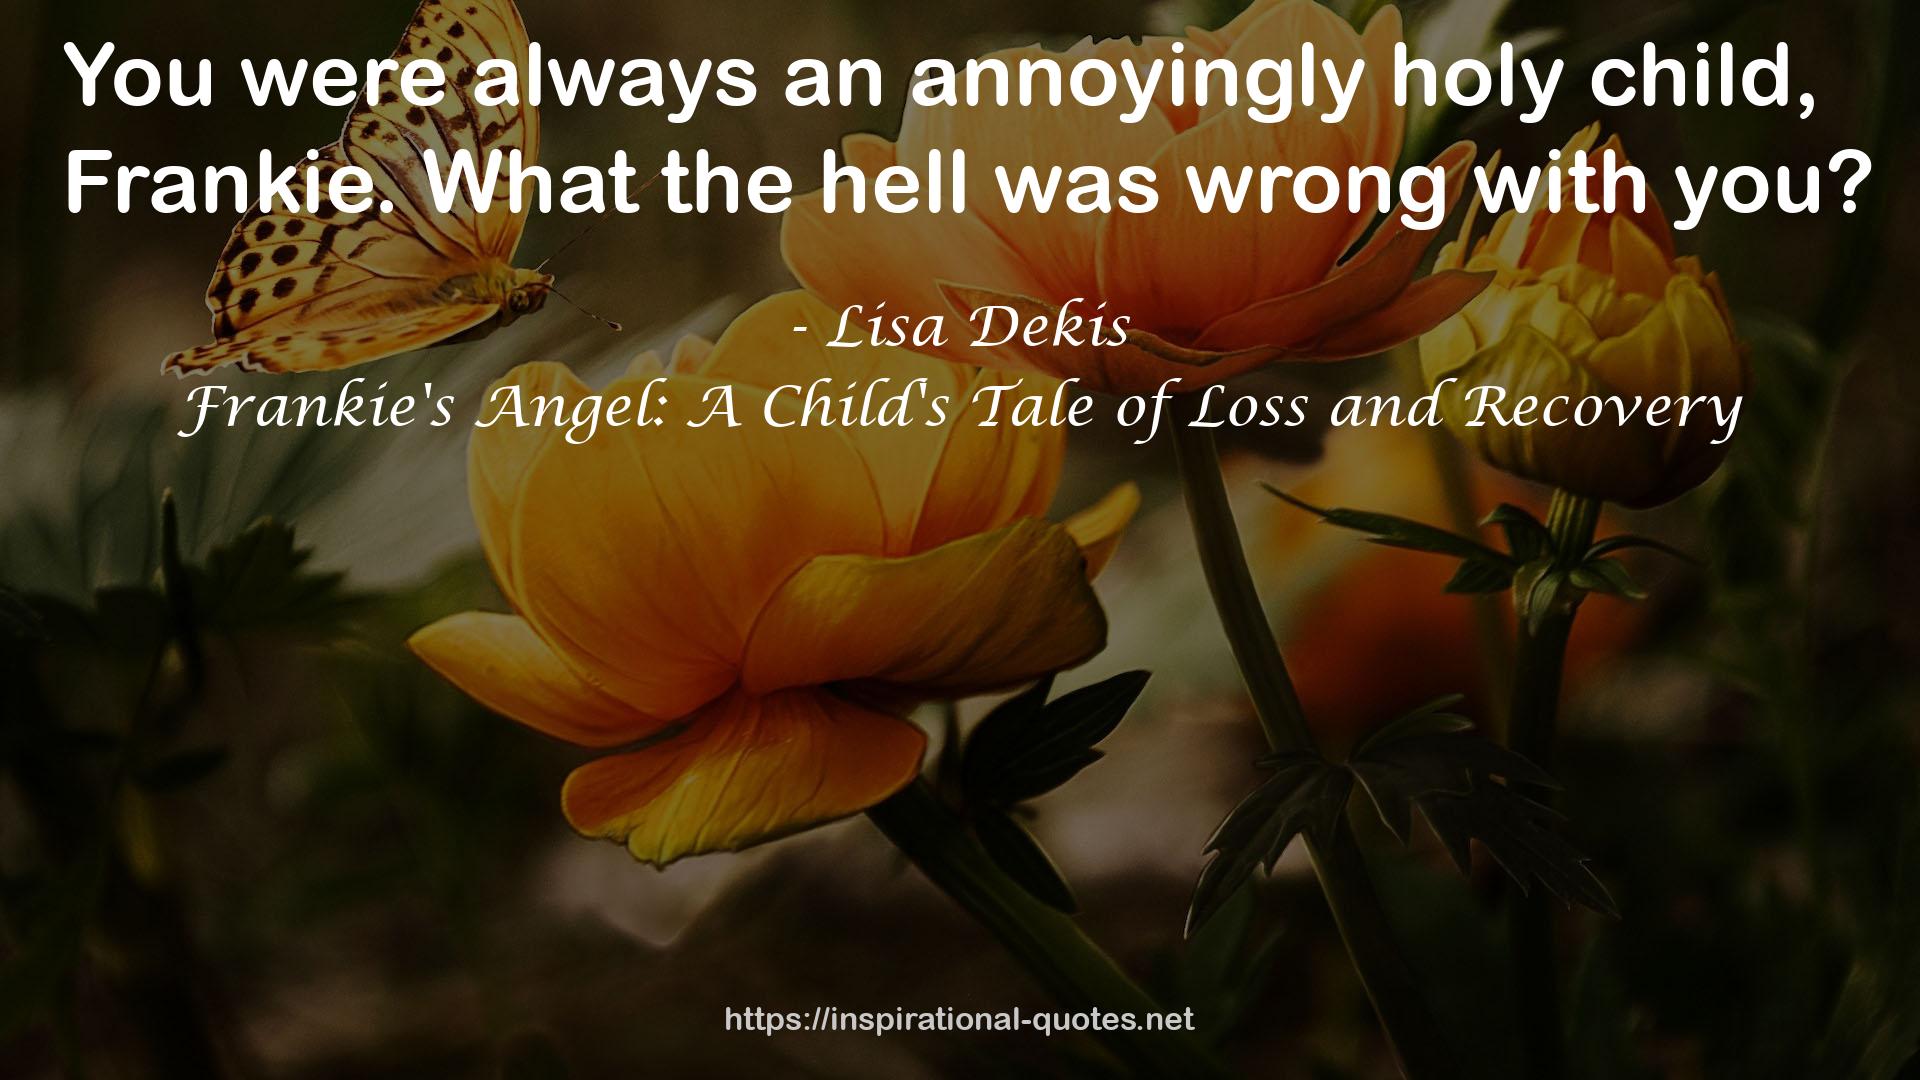 Frankie's Angel: A Child's Tale of Loss and Recovery QUOTES